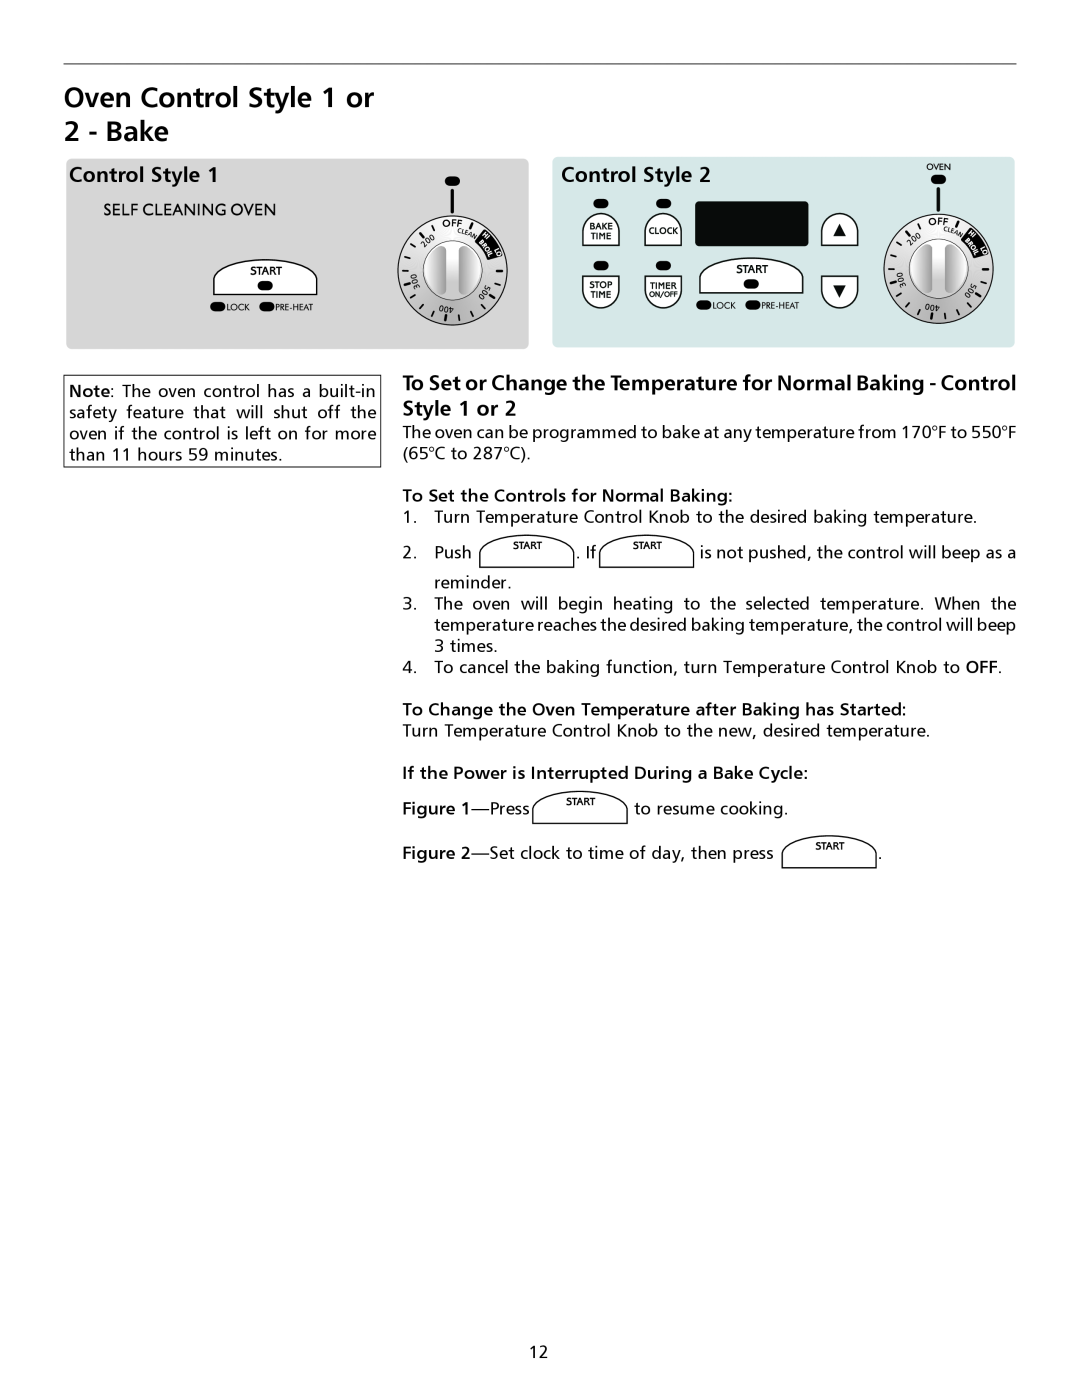 Frigidaire pmn important safety instructions Oven Control Style 1 or 2 - Bake, To Set the Controls for Normal Baking 